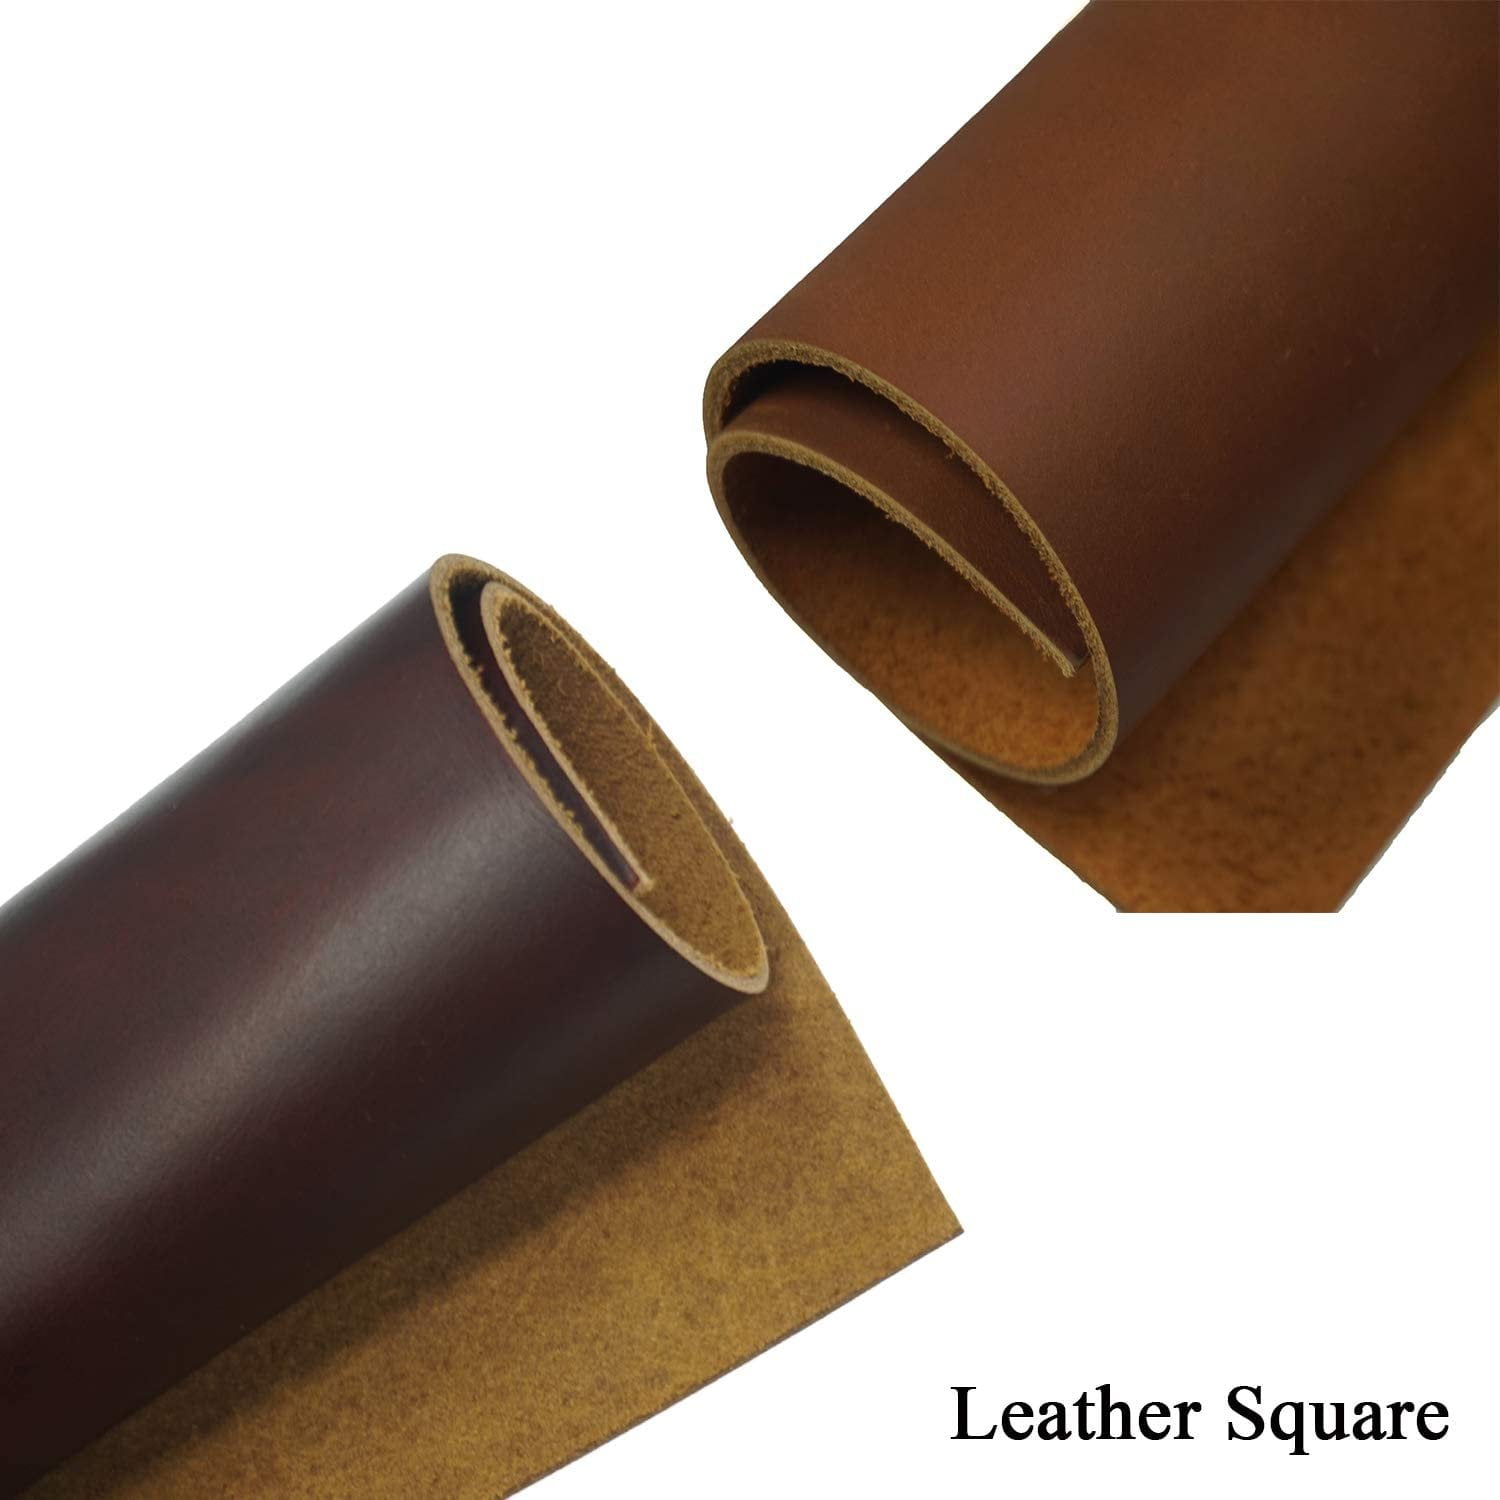 8x10 LARGE SQUARE HOLES Perforated Cowhide Leather Pieces in